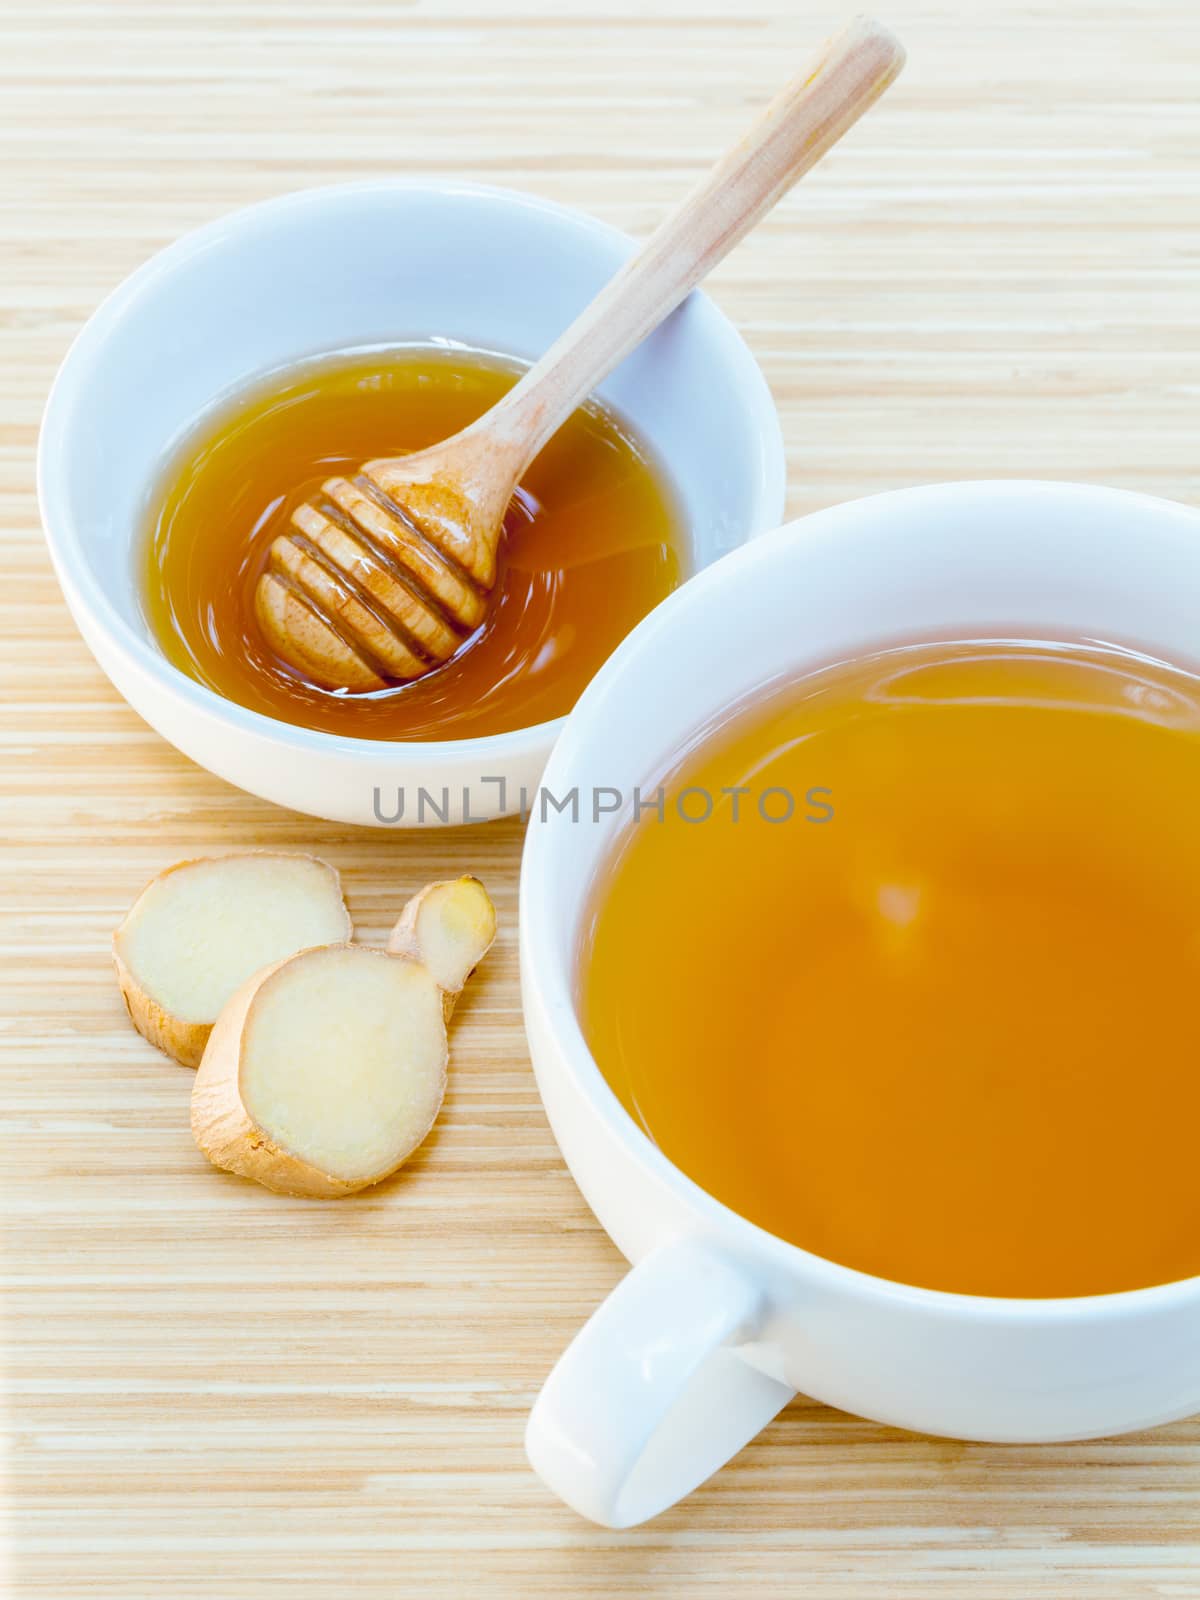 A Cup of ginger tea with honey on wooden background, concept for healthy nutrition.